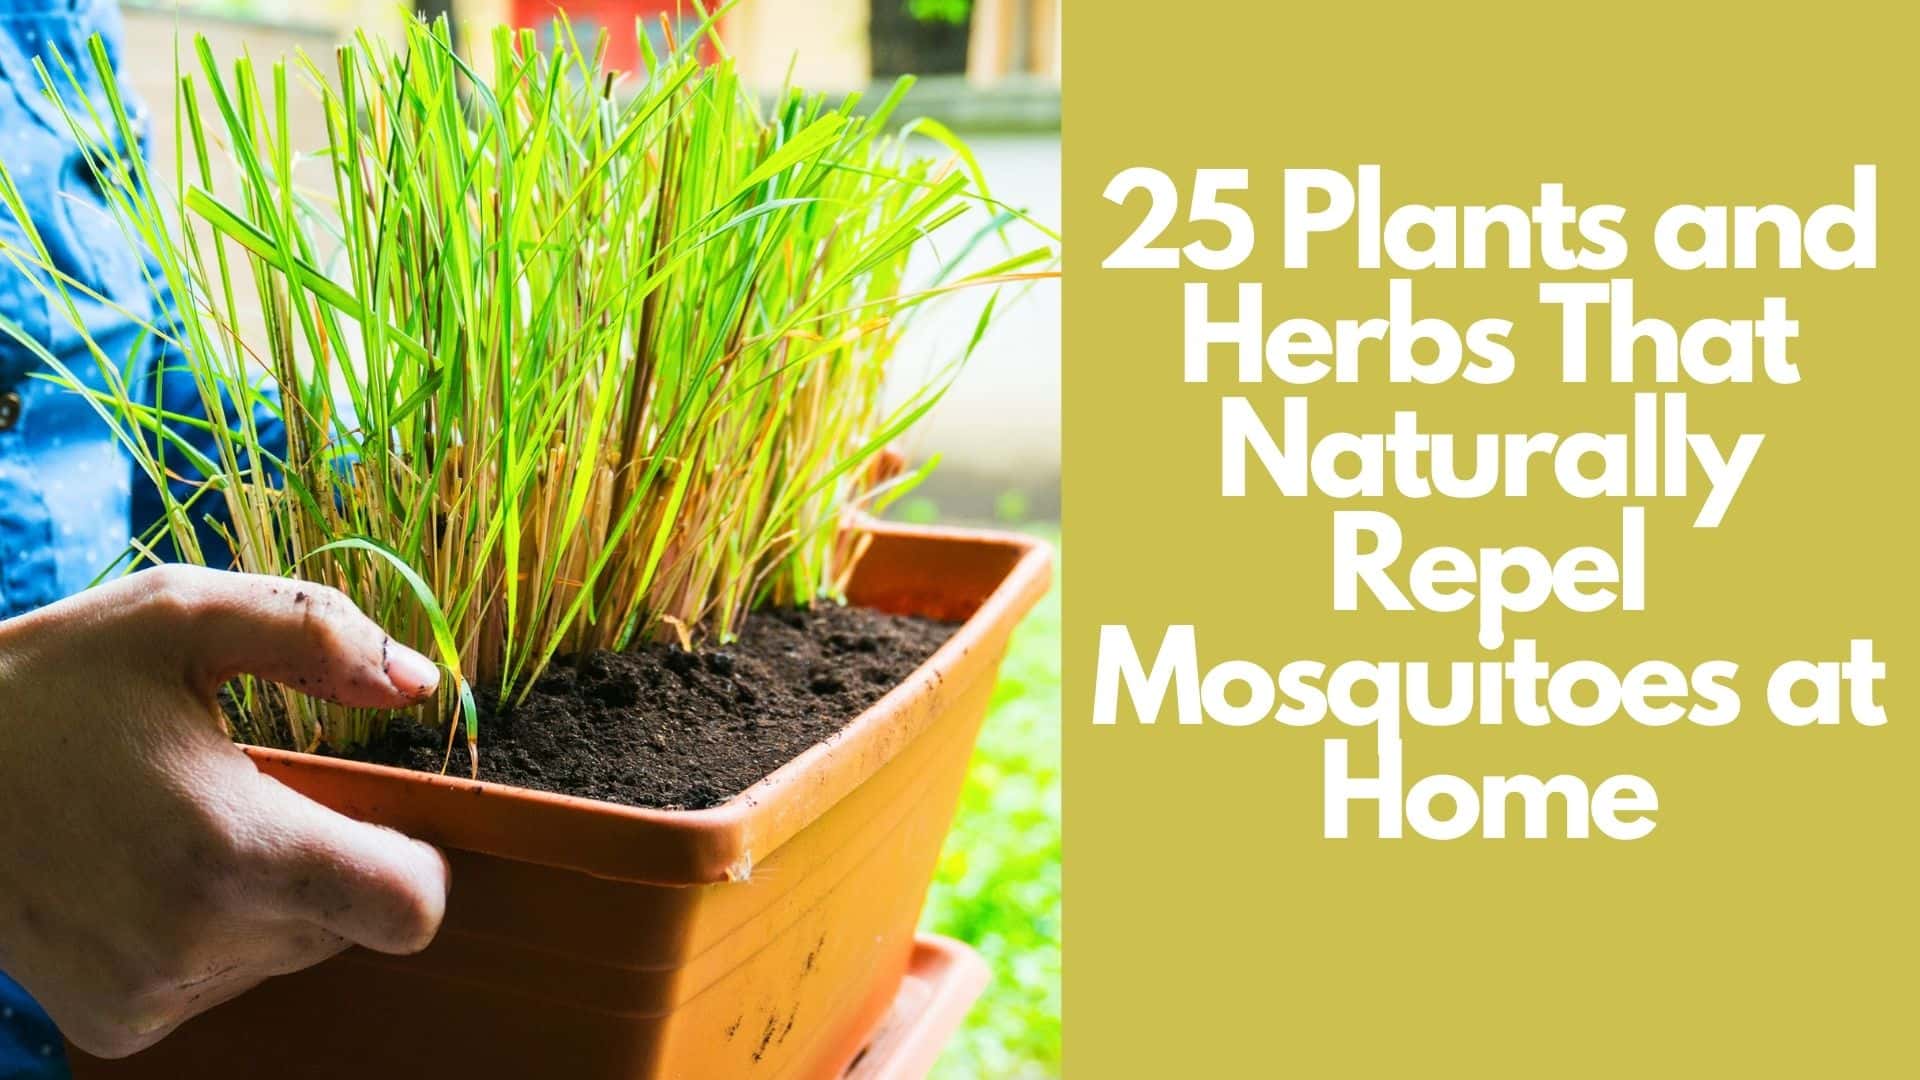 25 Plants and Herbs That Naturally Repel Mosquitoes at Home